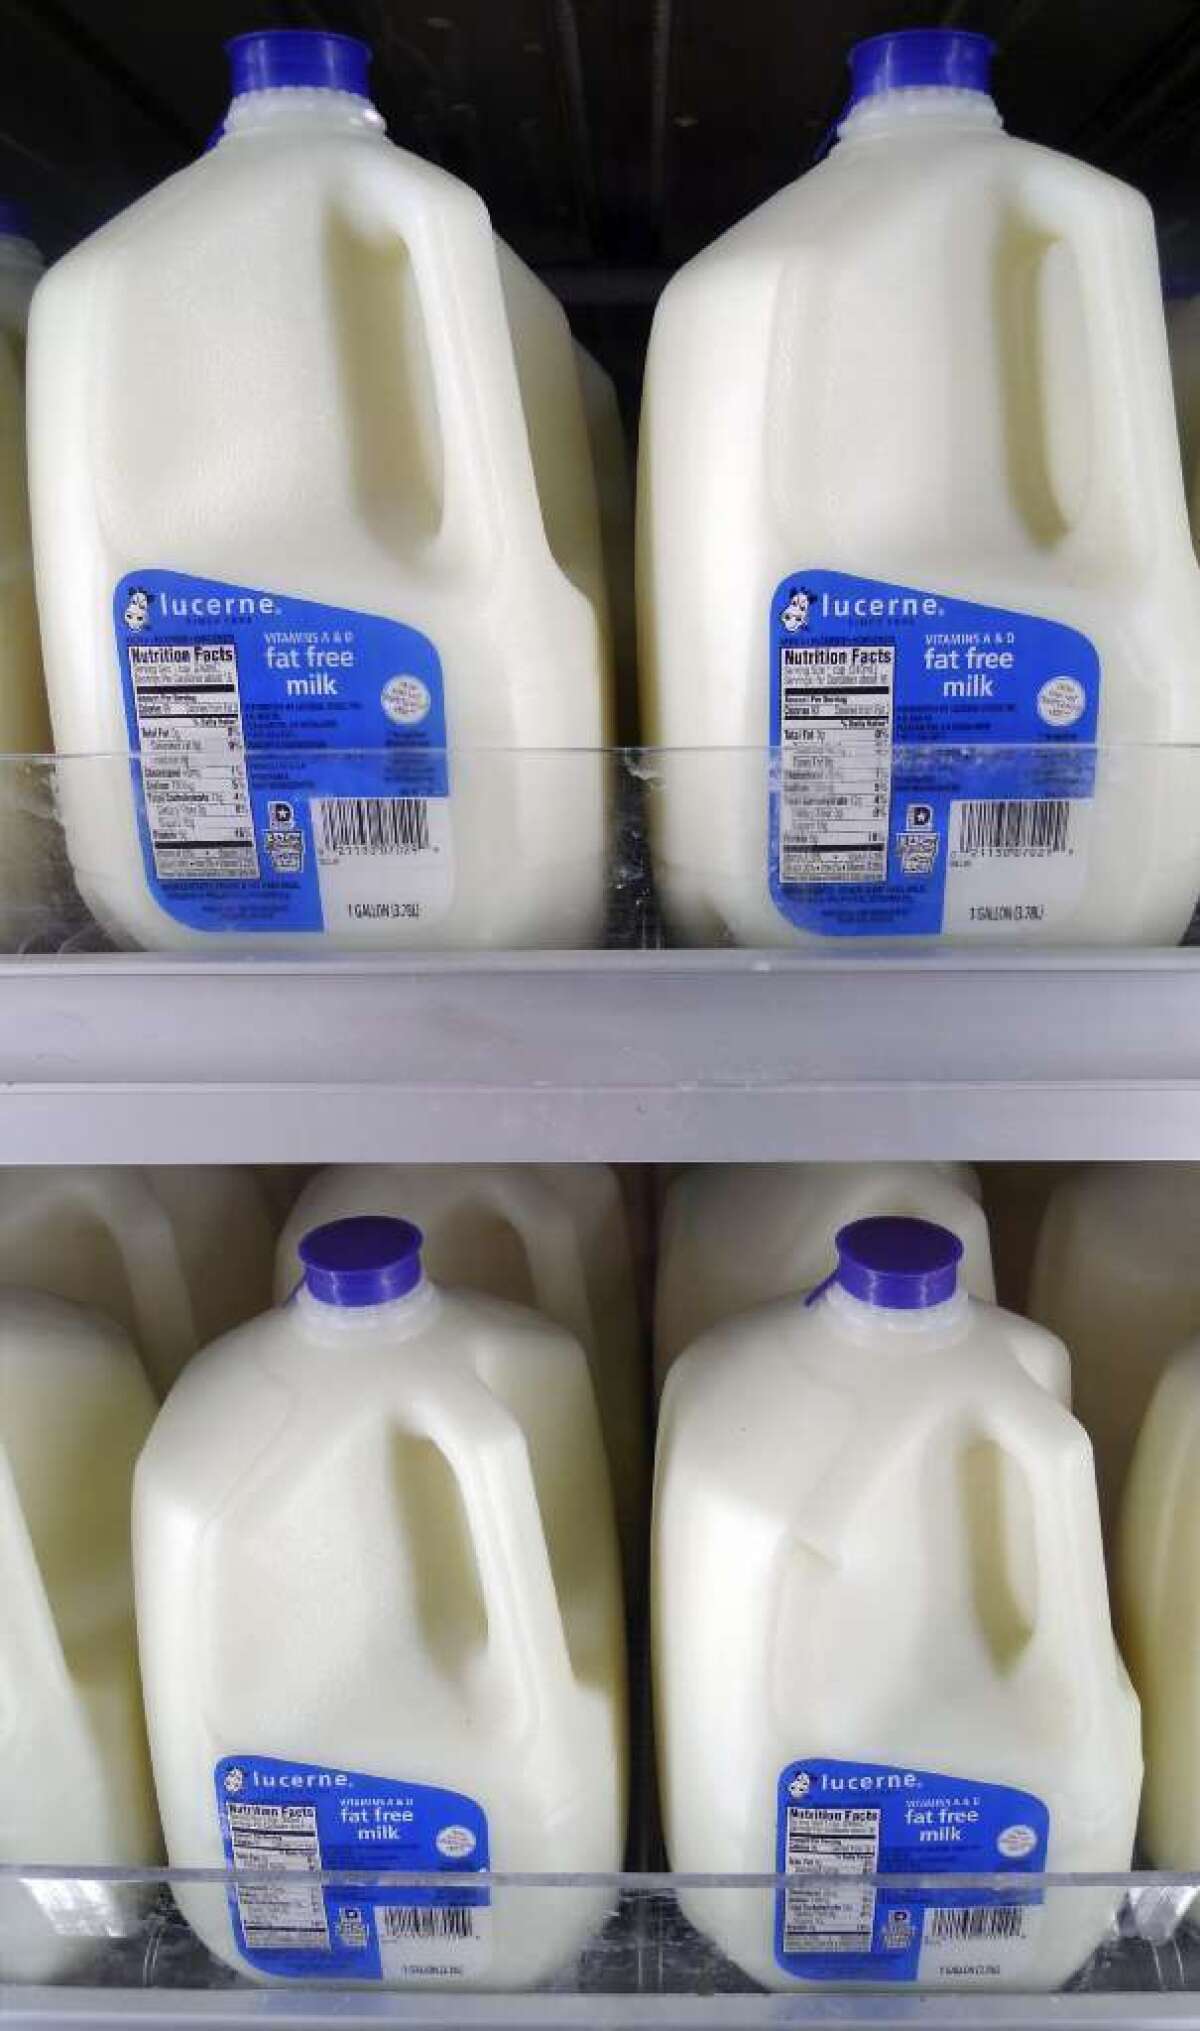 A British physician calls for an end to the war against saturated fat that began in the 1970s after saturated fat intake was linked to heart disease. Among the research cited is evidence that the saturated fat in dairy products may be protective against heart risk.